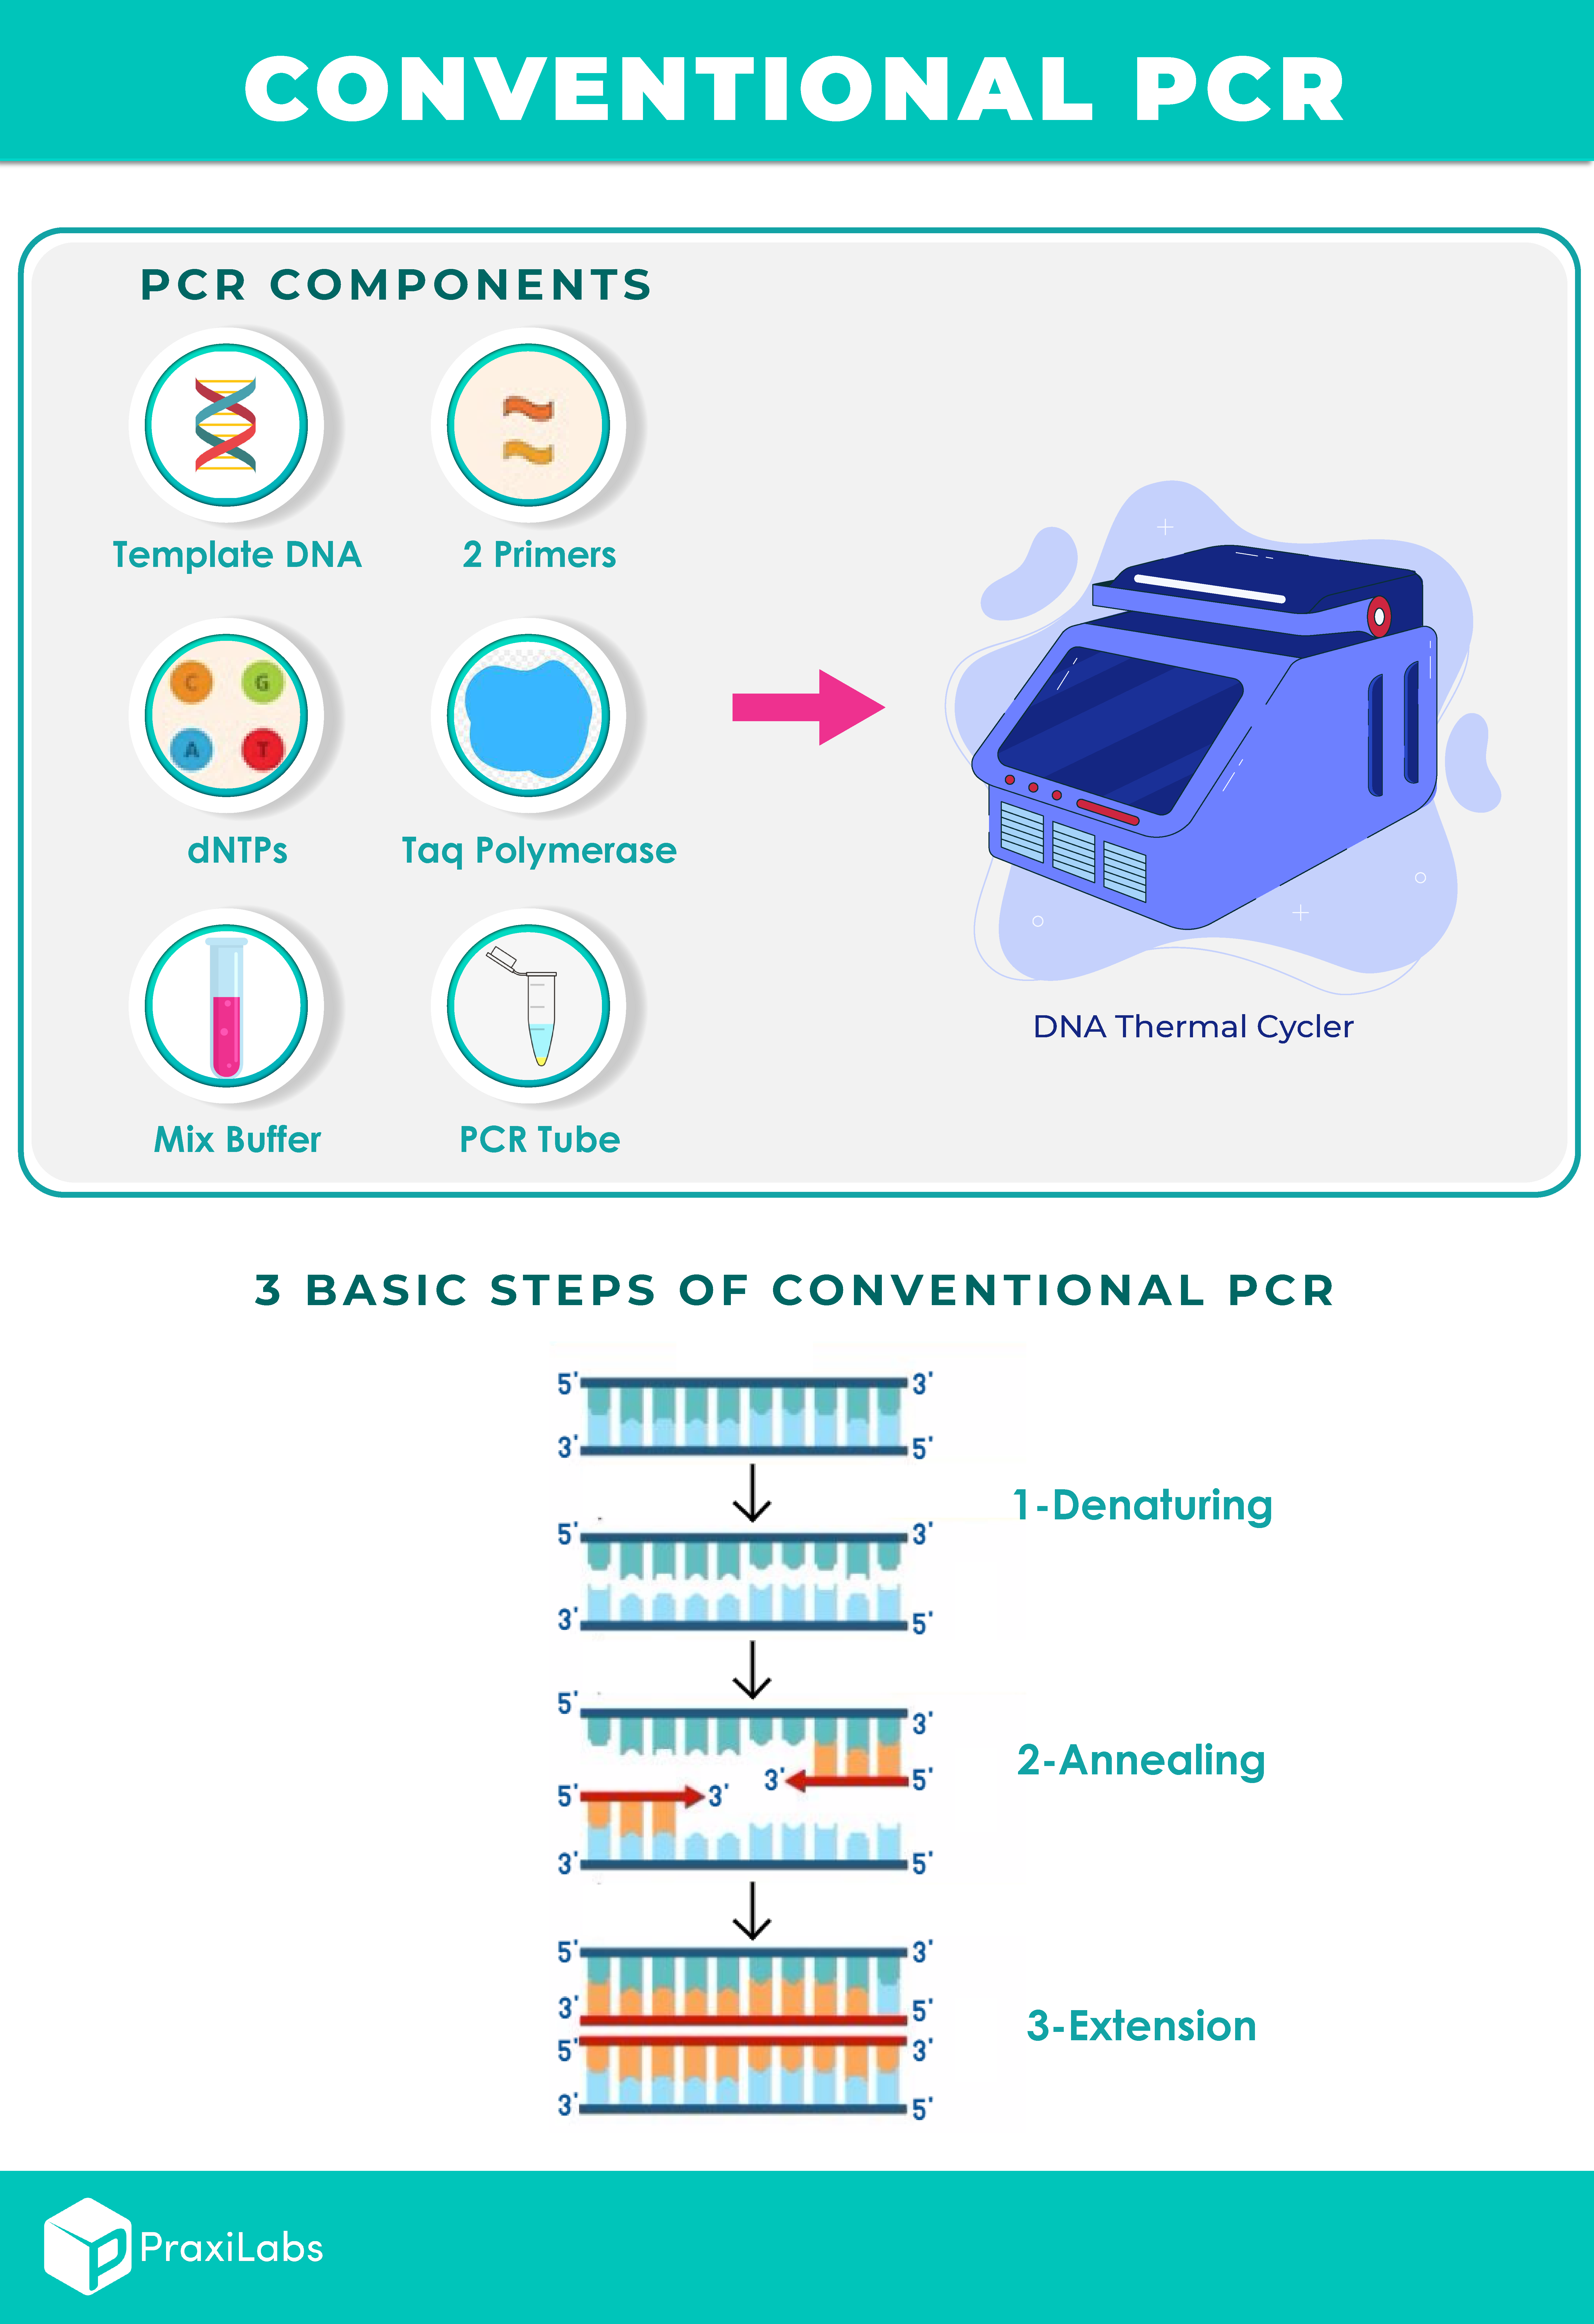 PCR steps and components